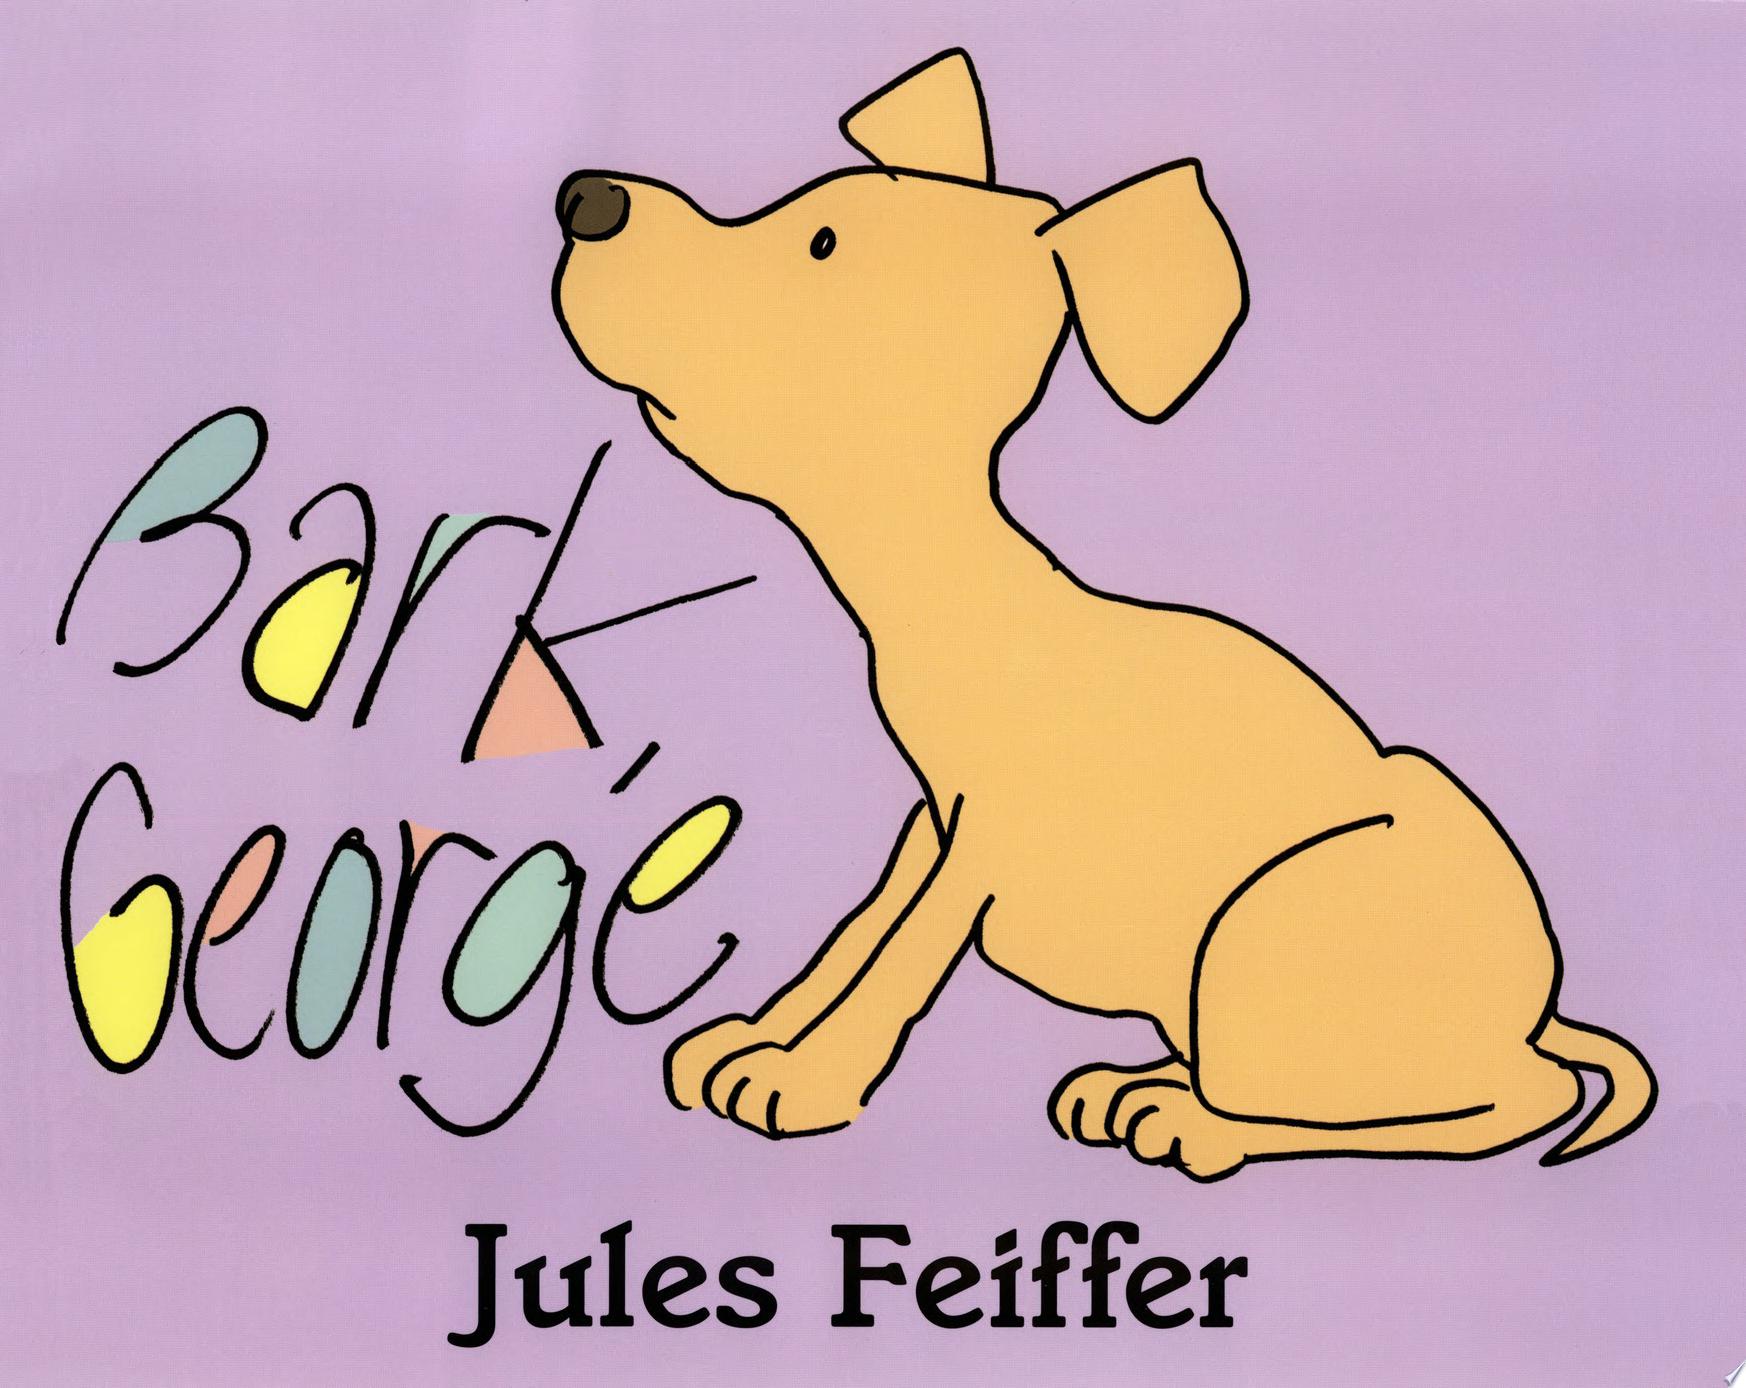 Image for "Bark, George"